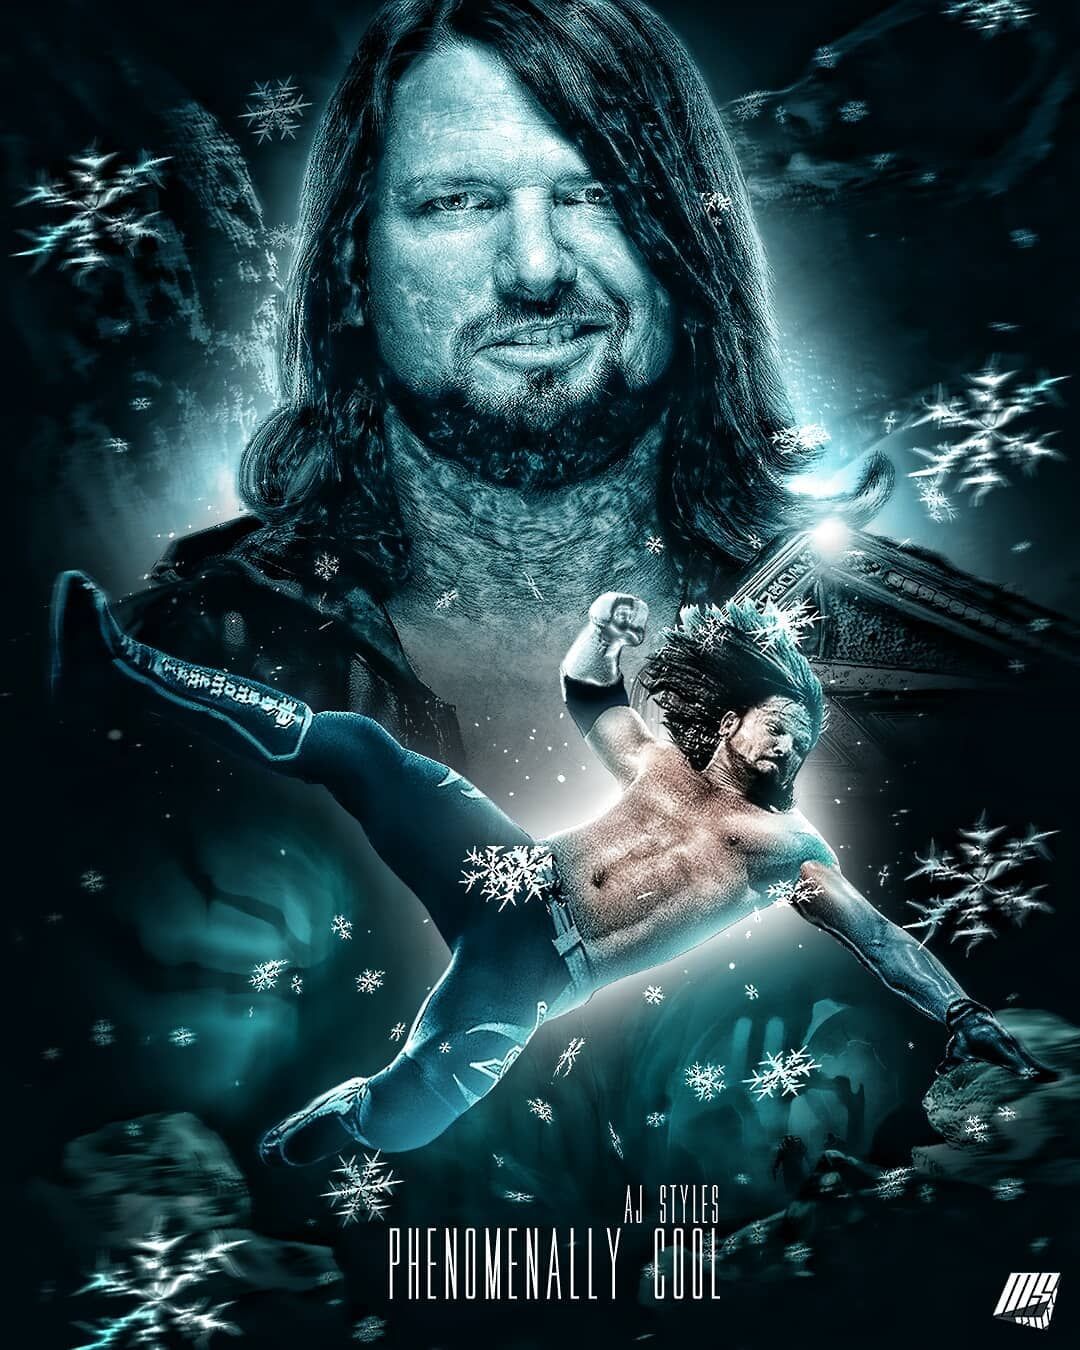 NEW AJ Styles 2016 WWE Superstar of the Year wallpaper! - Kupy Wrestling  Wallpapers